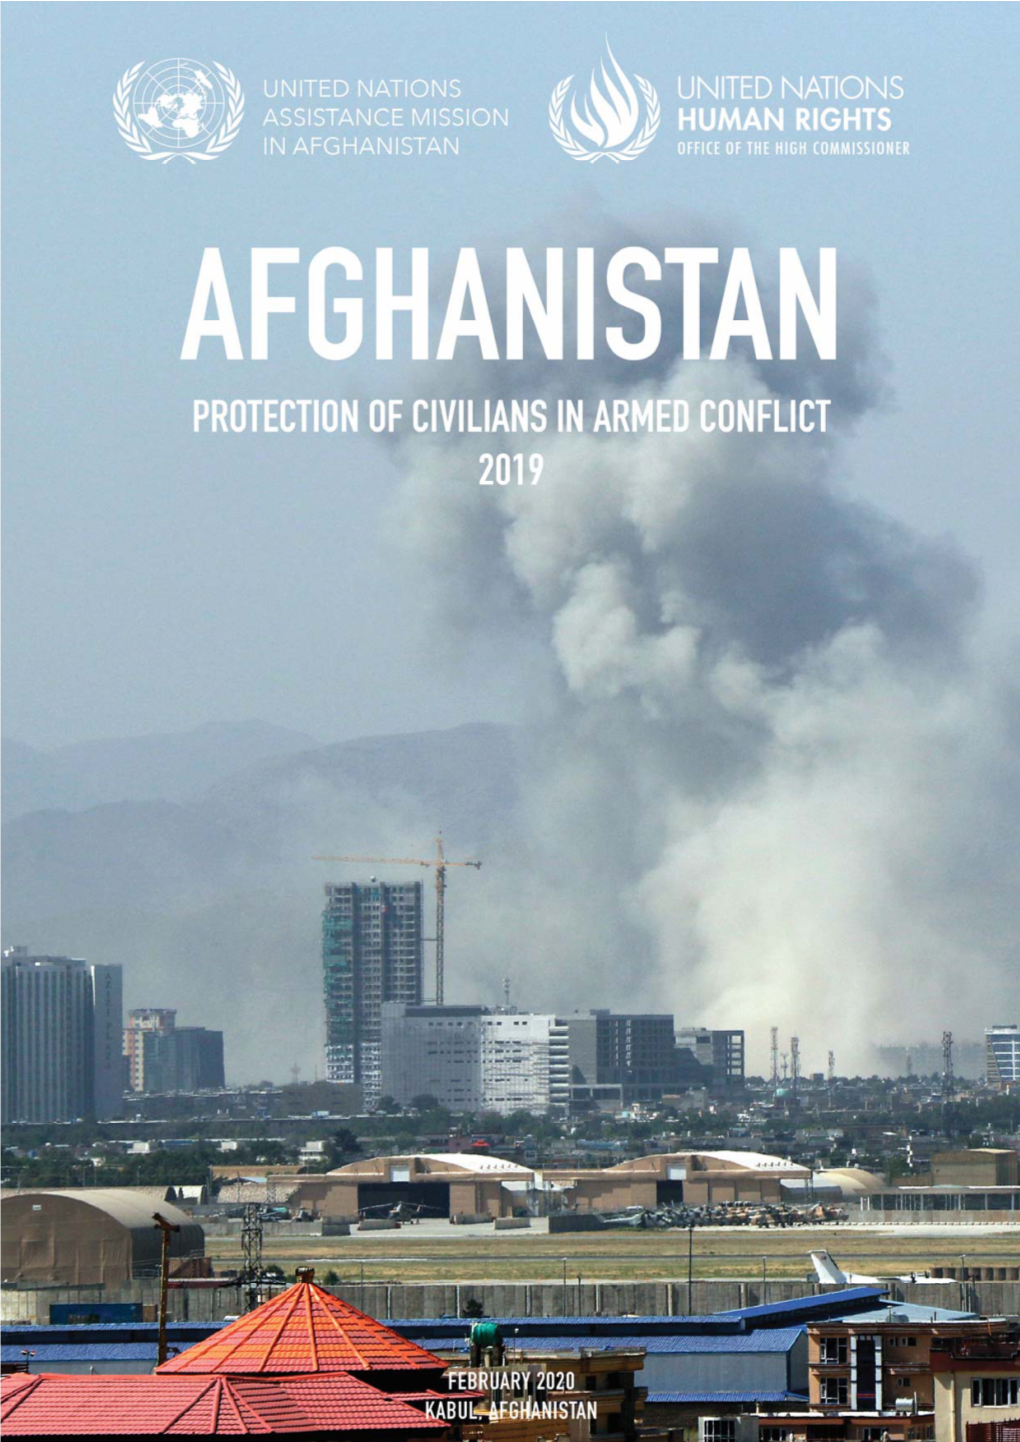 Afghanistan Annual Report on Protection of Civilians in Armed Conflict: 2019